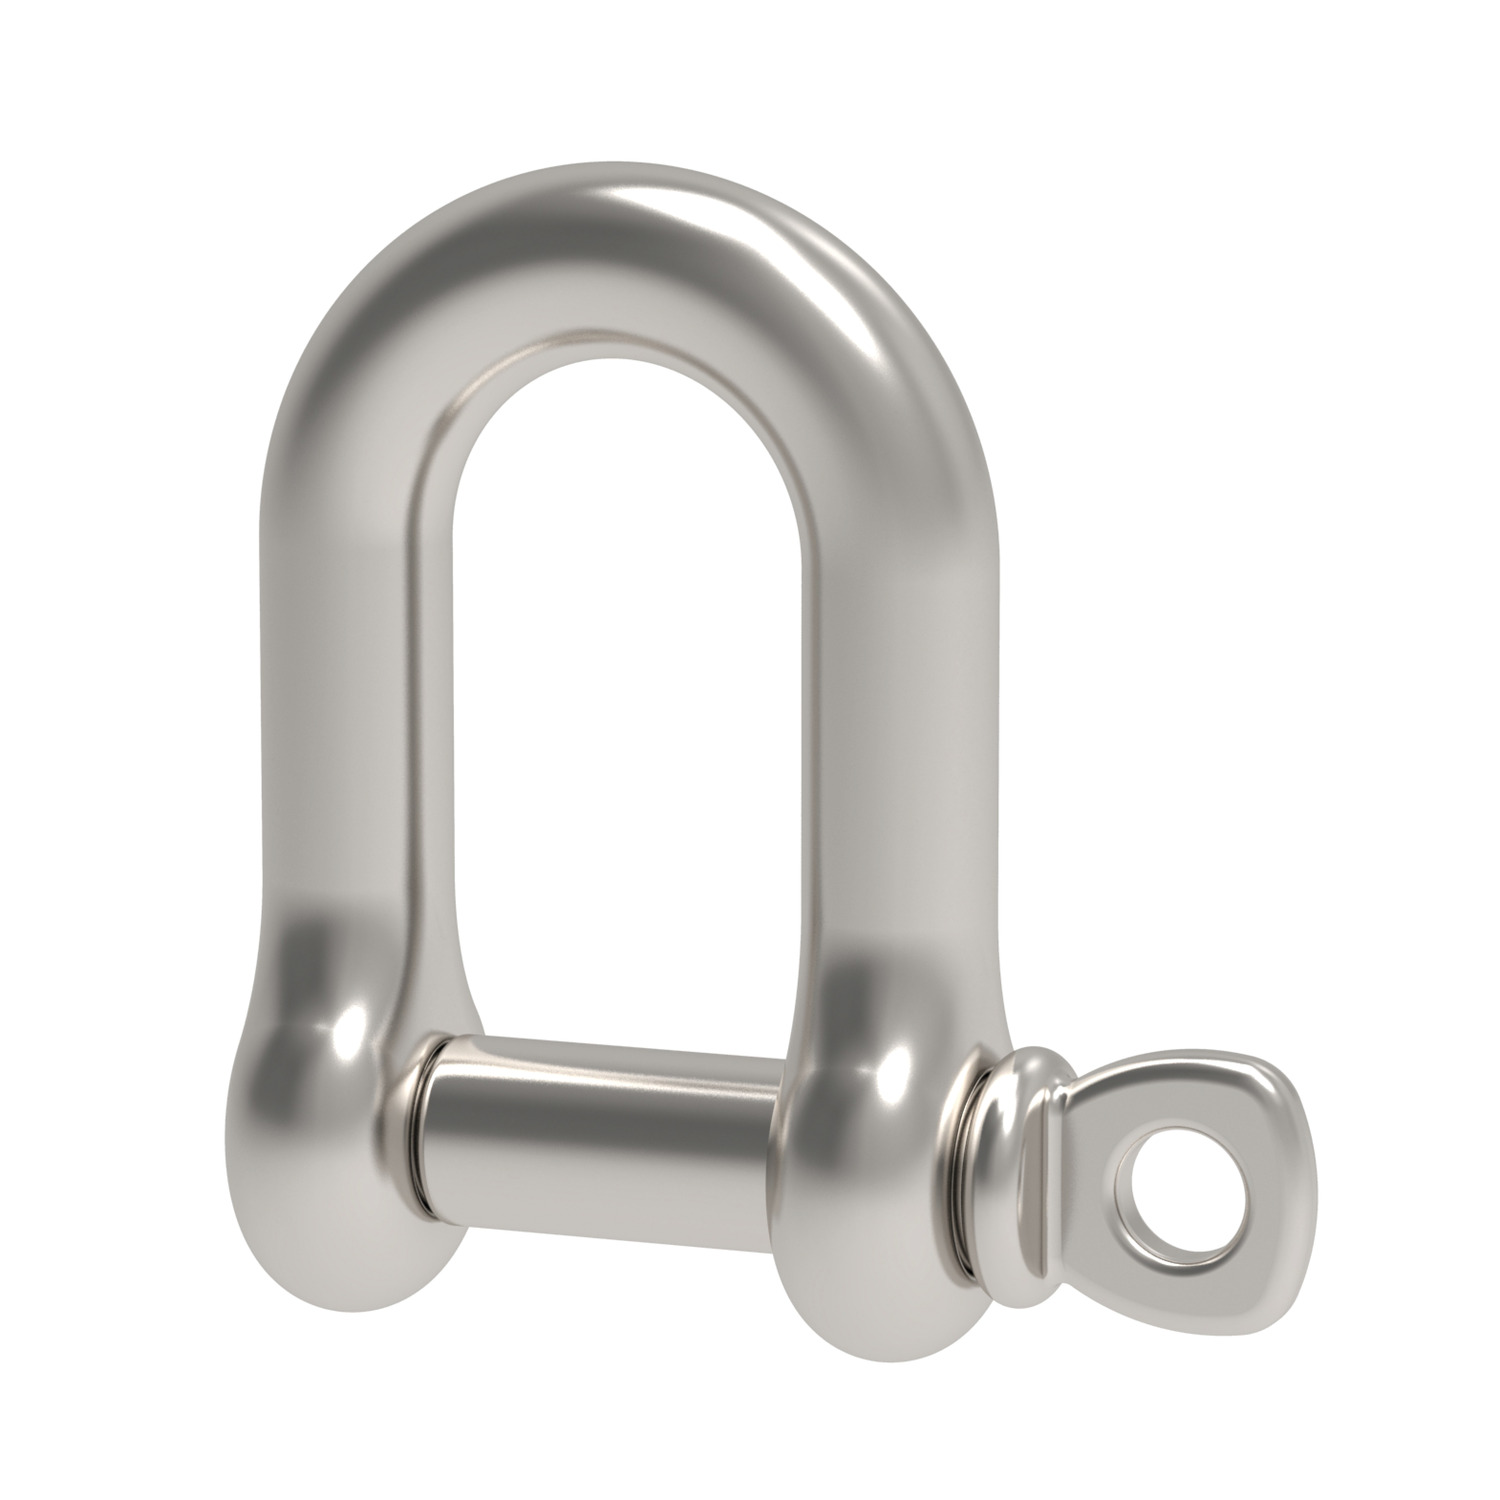 Shackles Our range of shackles feature a number of specialised options including coating, style and accessories.